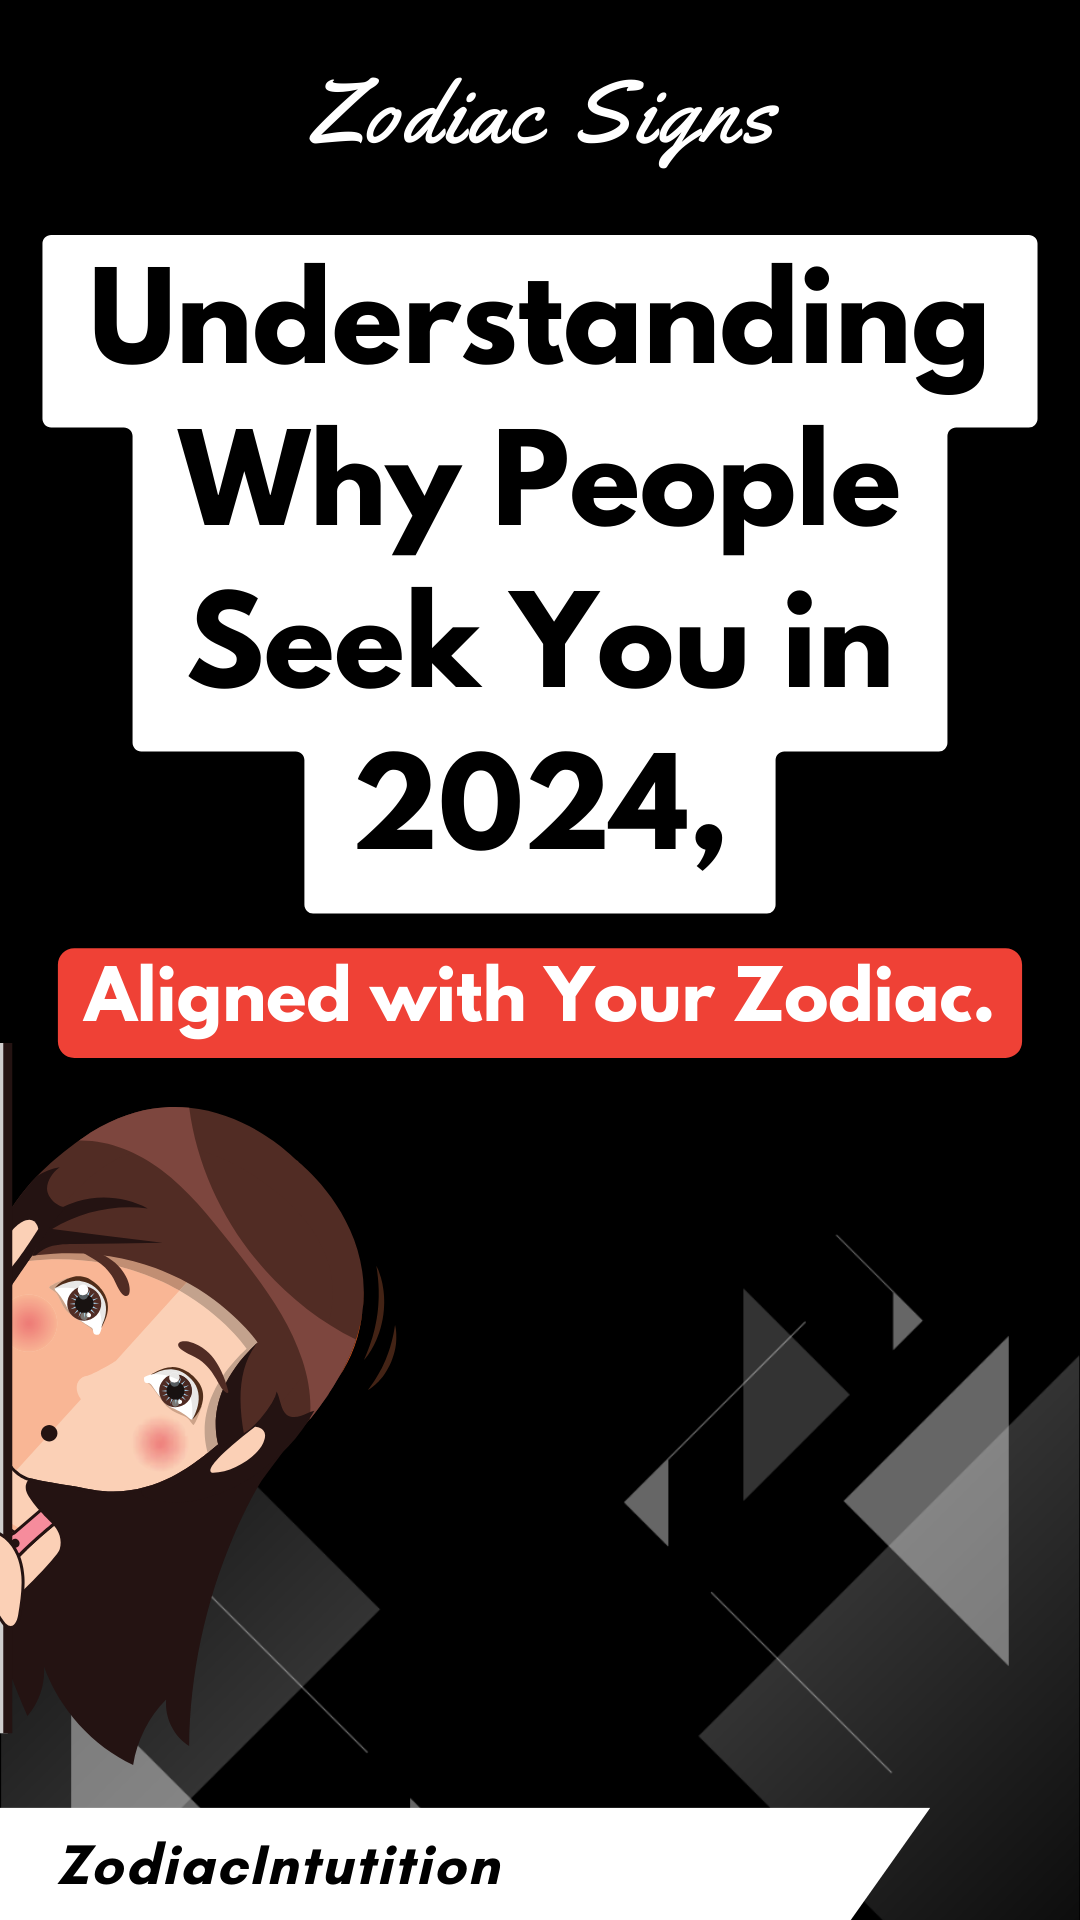 Understanding Why People Seek You in 2024, Aligned with Your Zodiac.